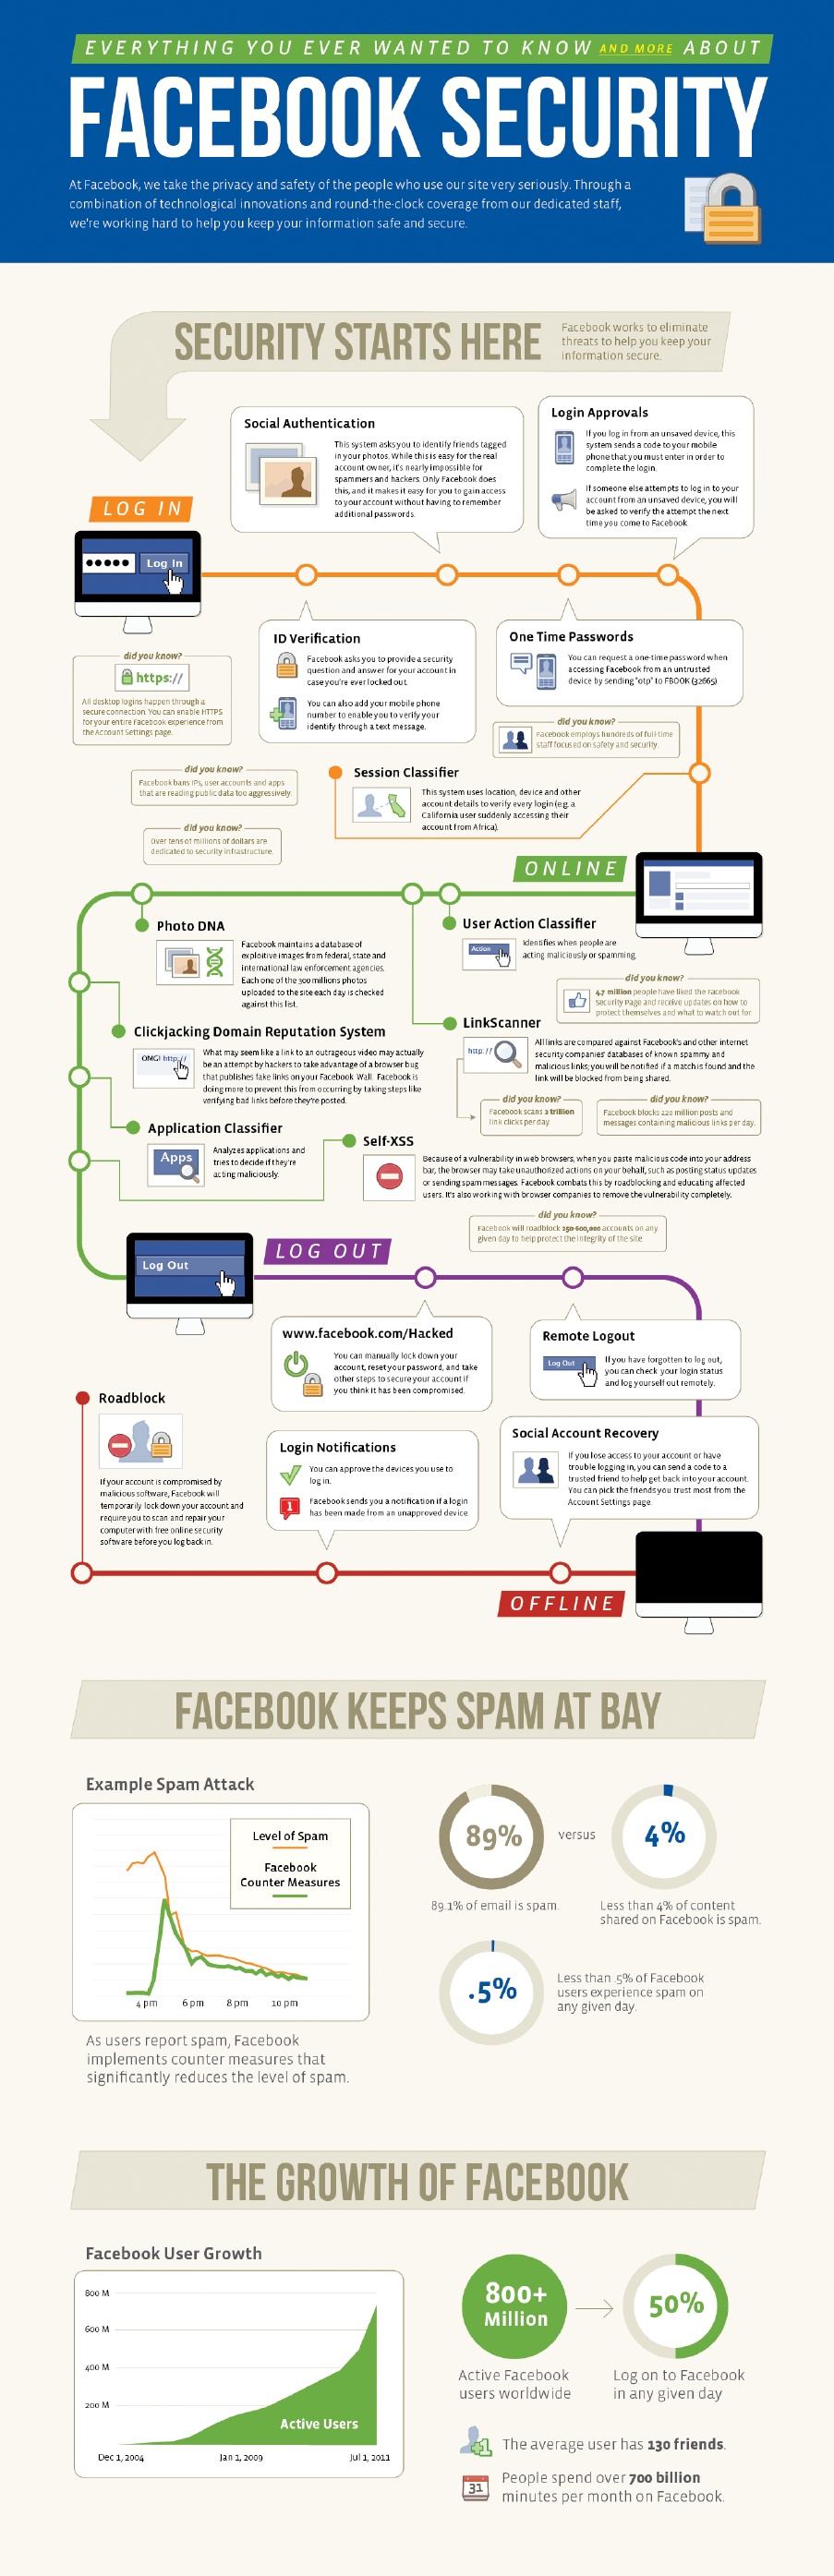 Facebook Security Infographic.jpg